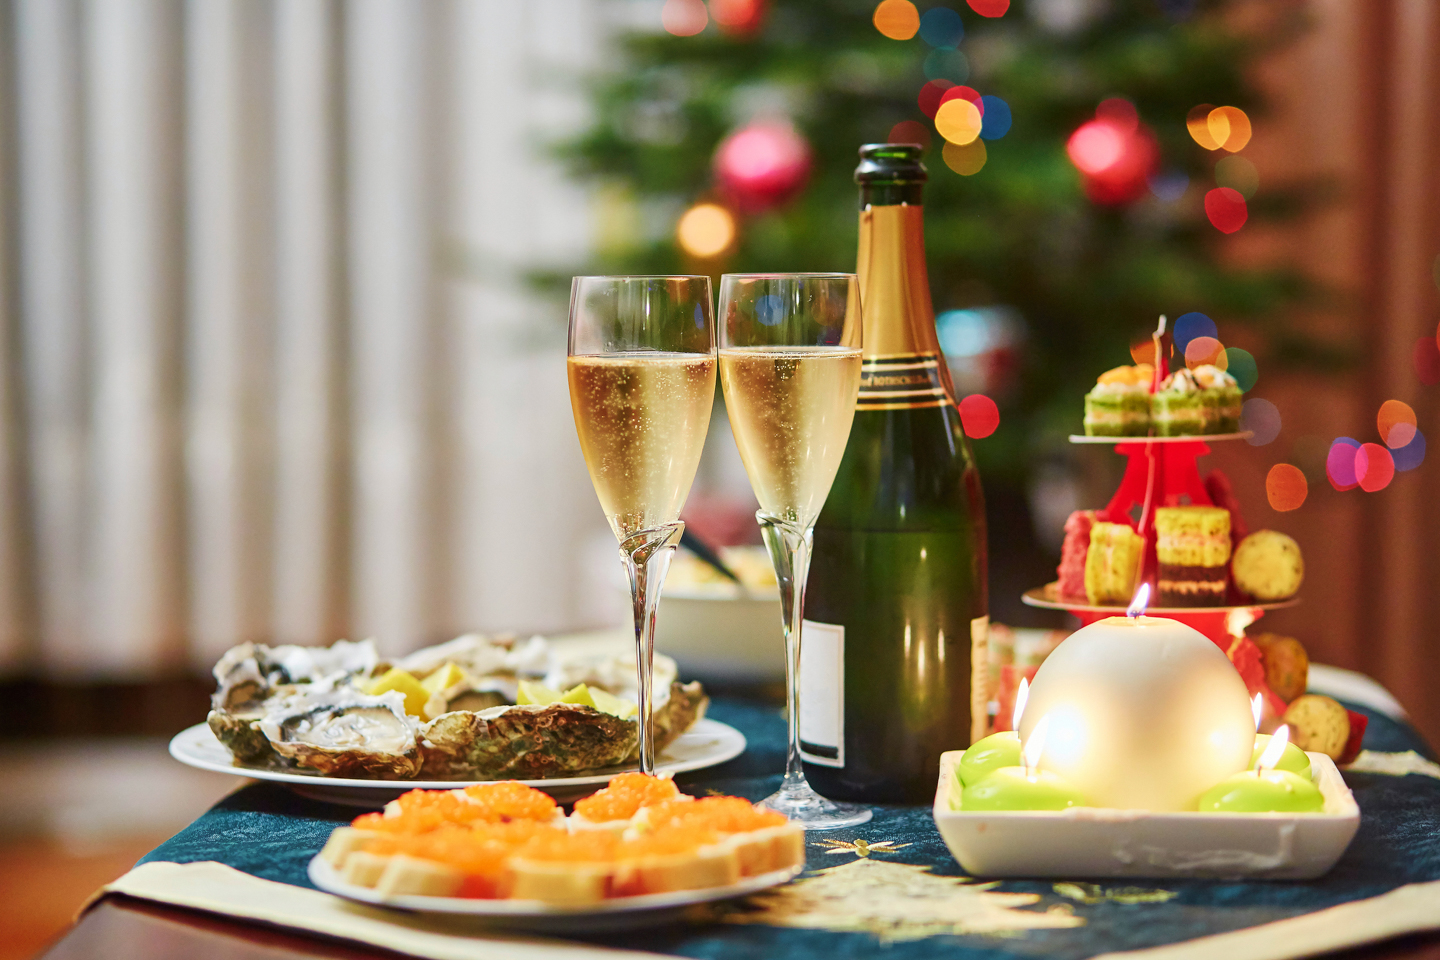 http://Traditional%20Christmas%20Dishes%20French%20Dreamstime%20L%2076973274